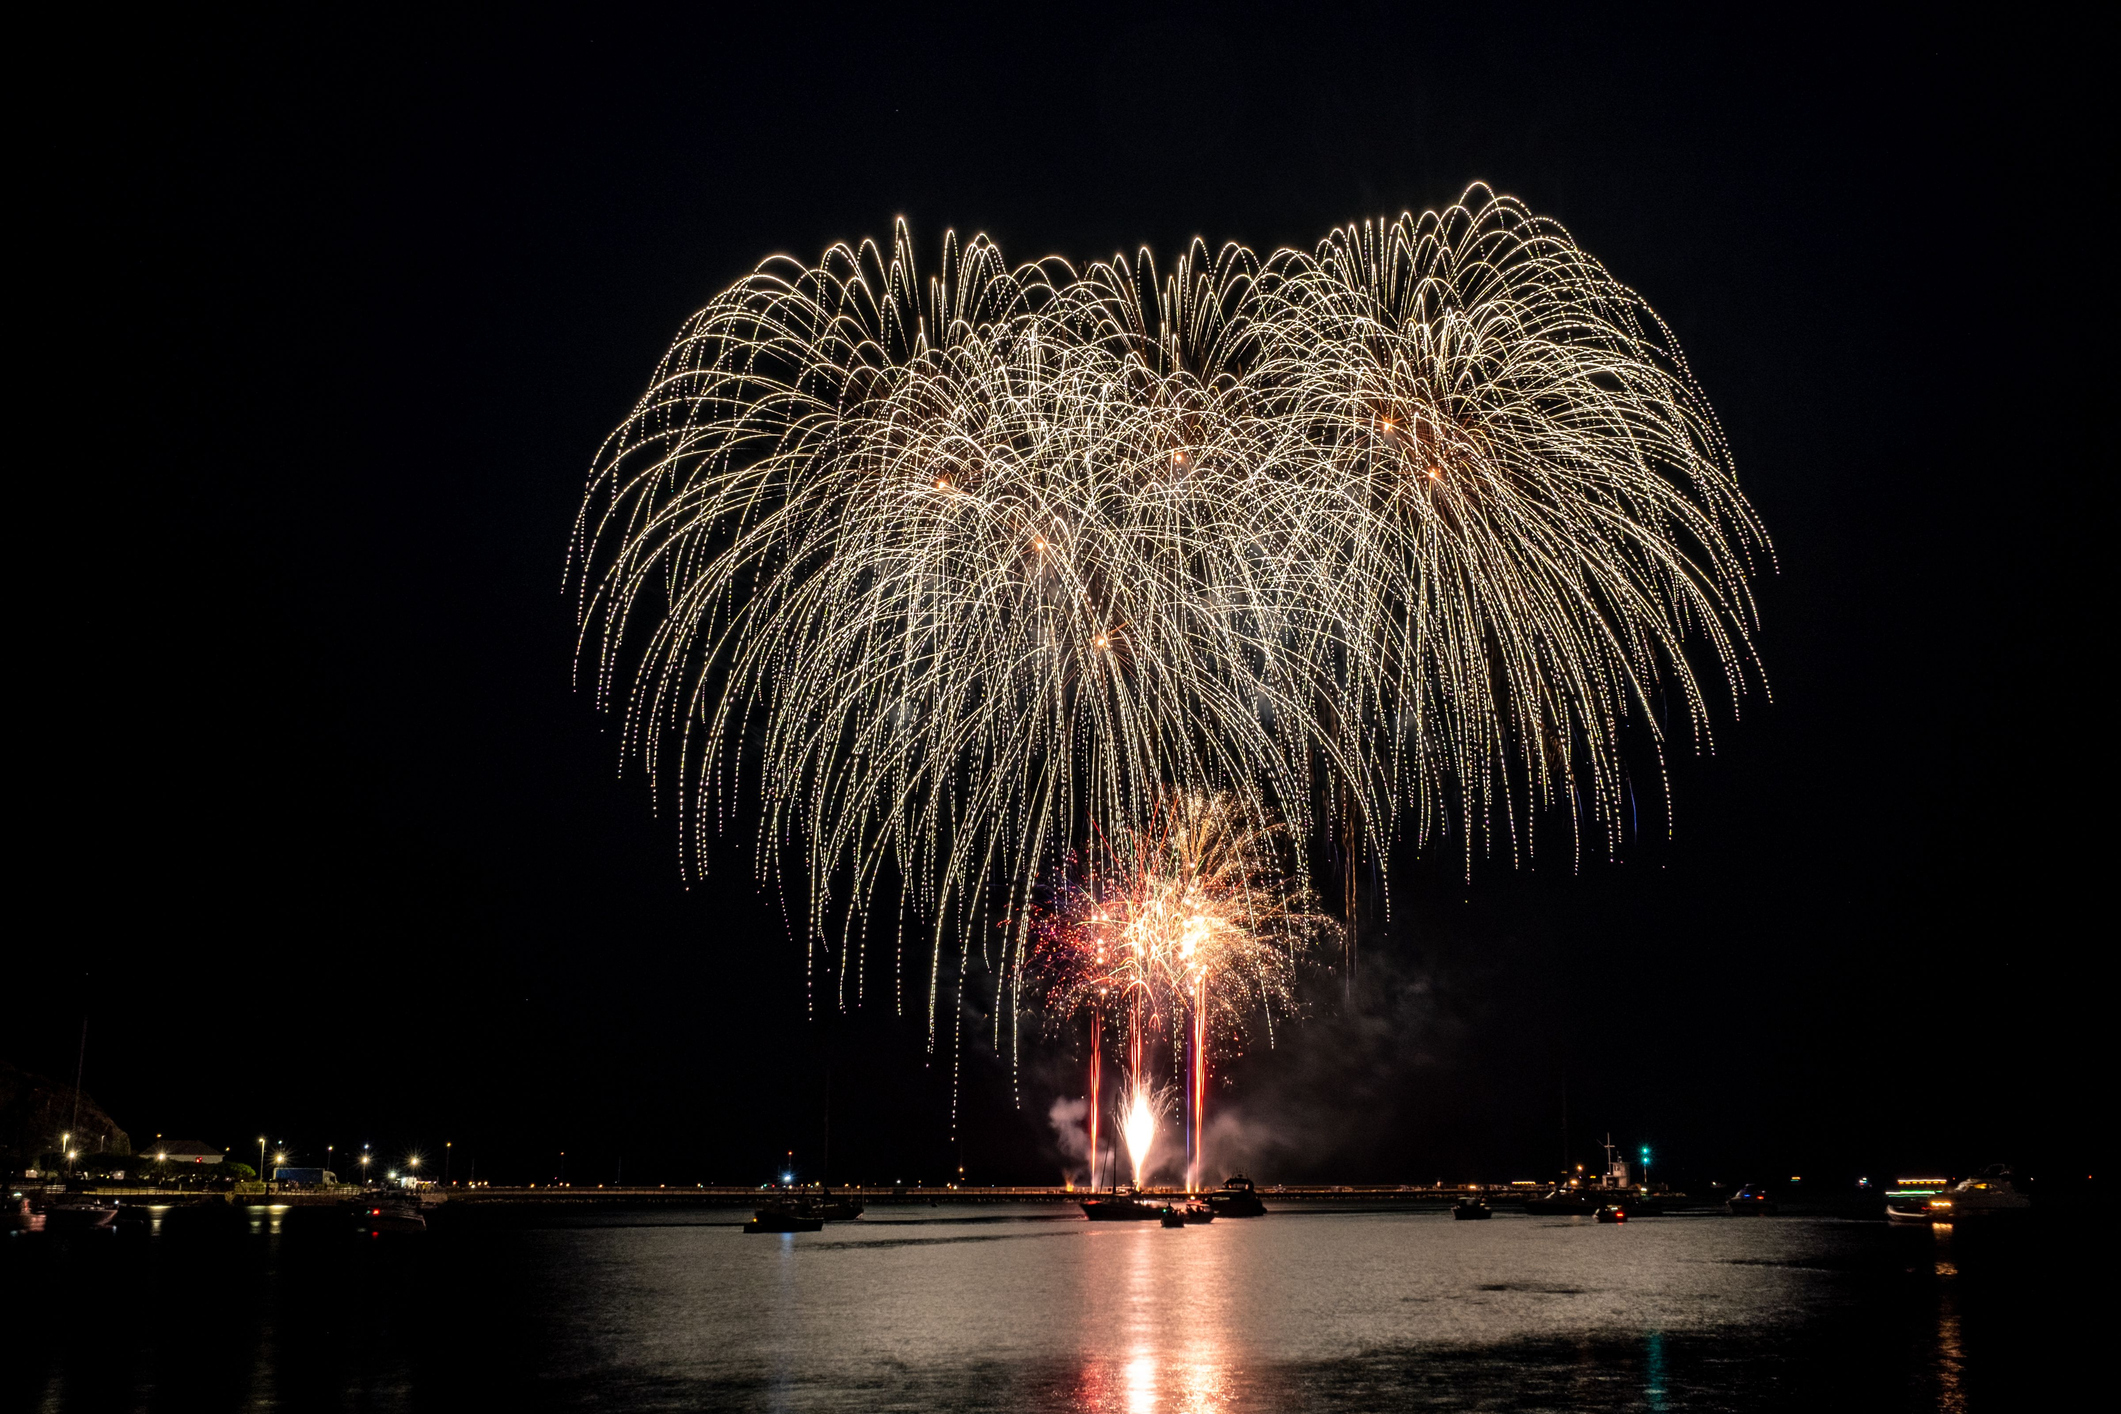 Fireworks bloom over the water against a black sky.